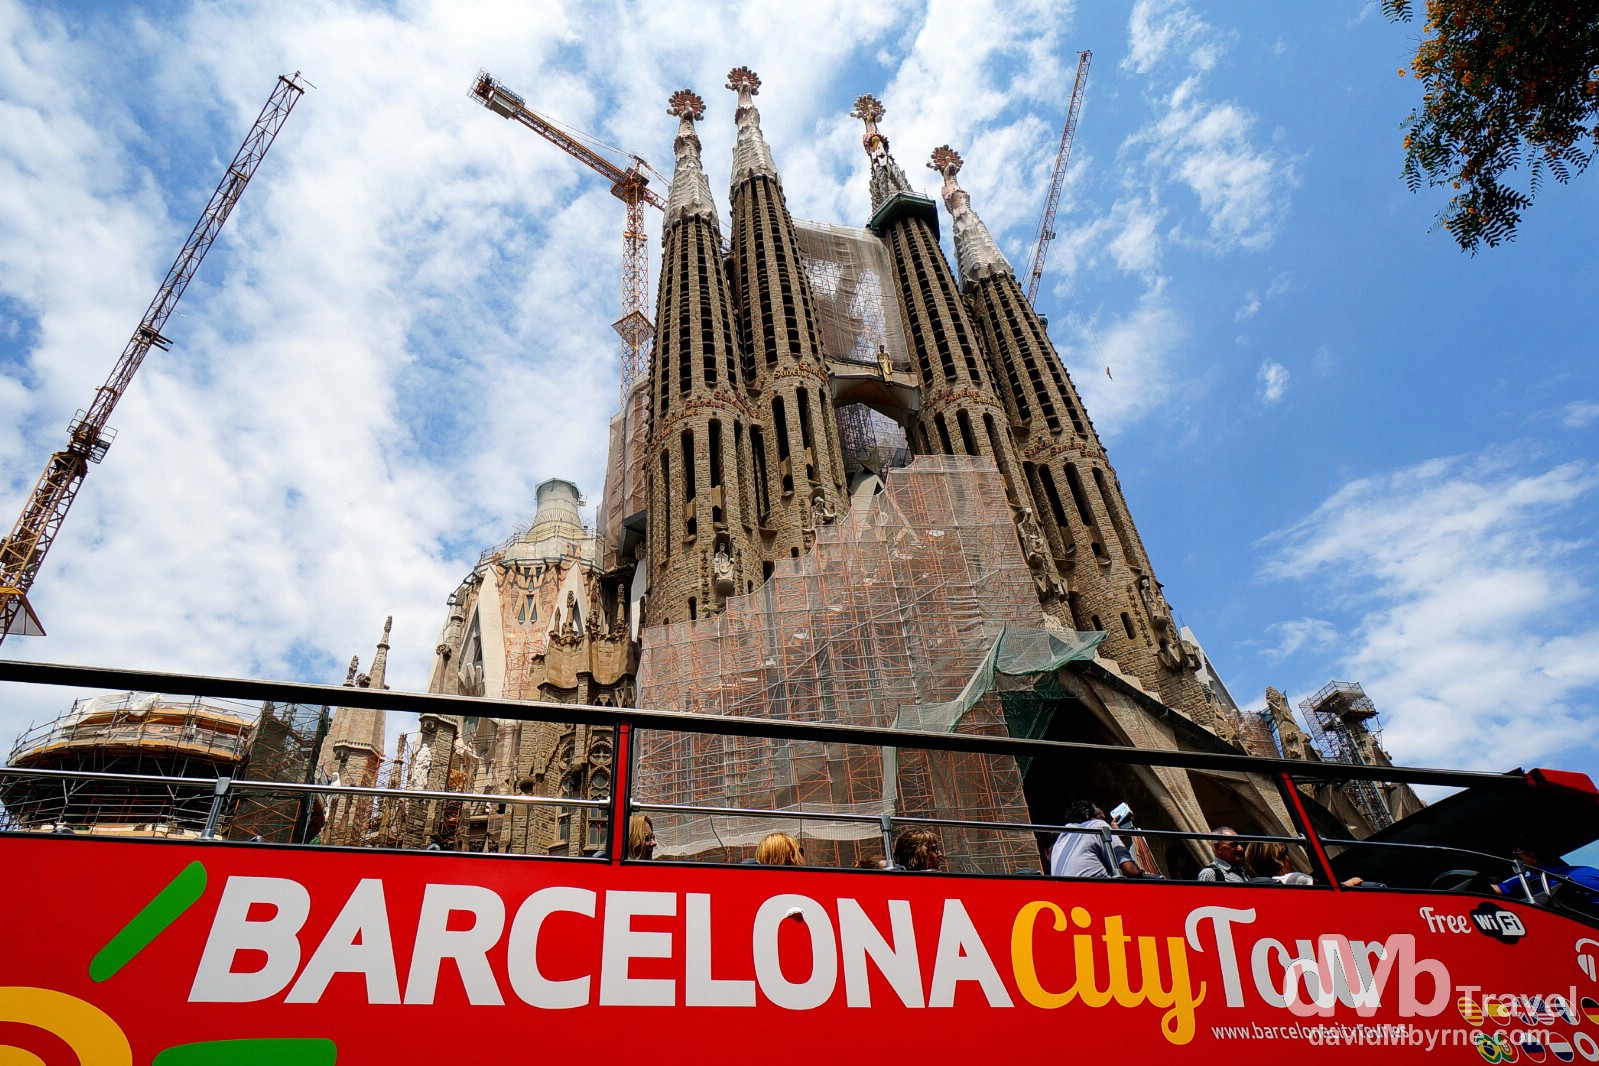 A City Tour bus passing the Passion Facade of the Sagrada Família in Barcelona, Catalonia, Spain. June 17th, 2014.